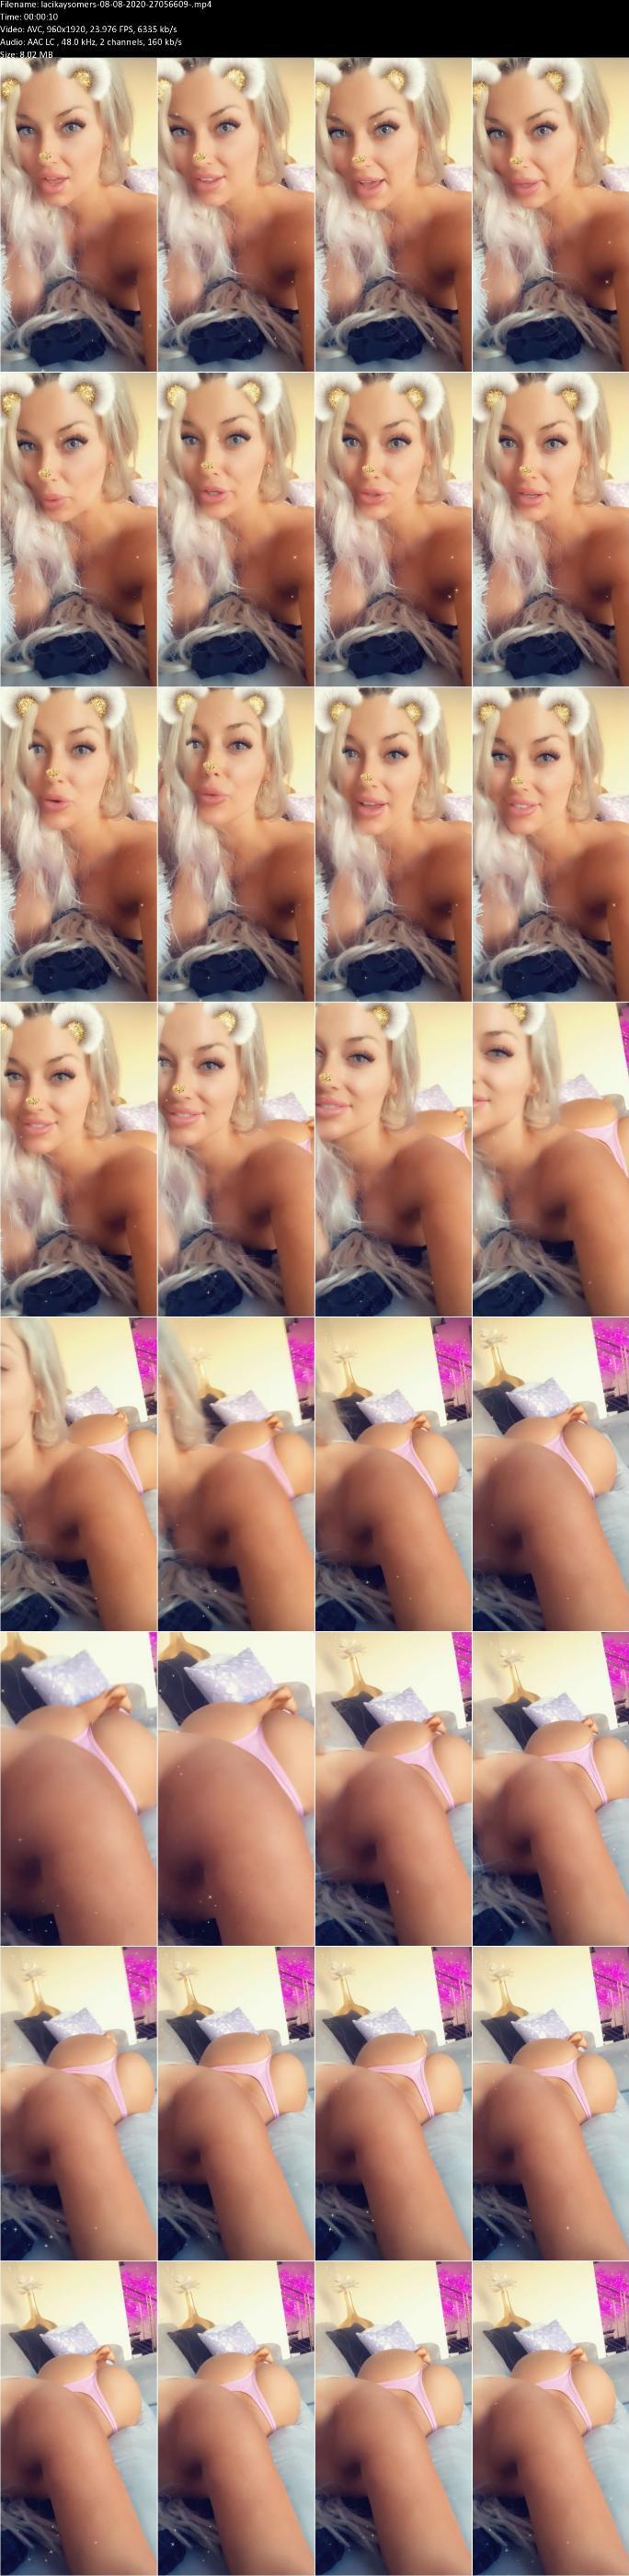 Laci kay somers only fans